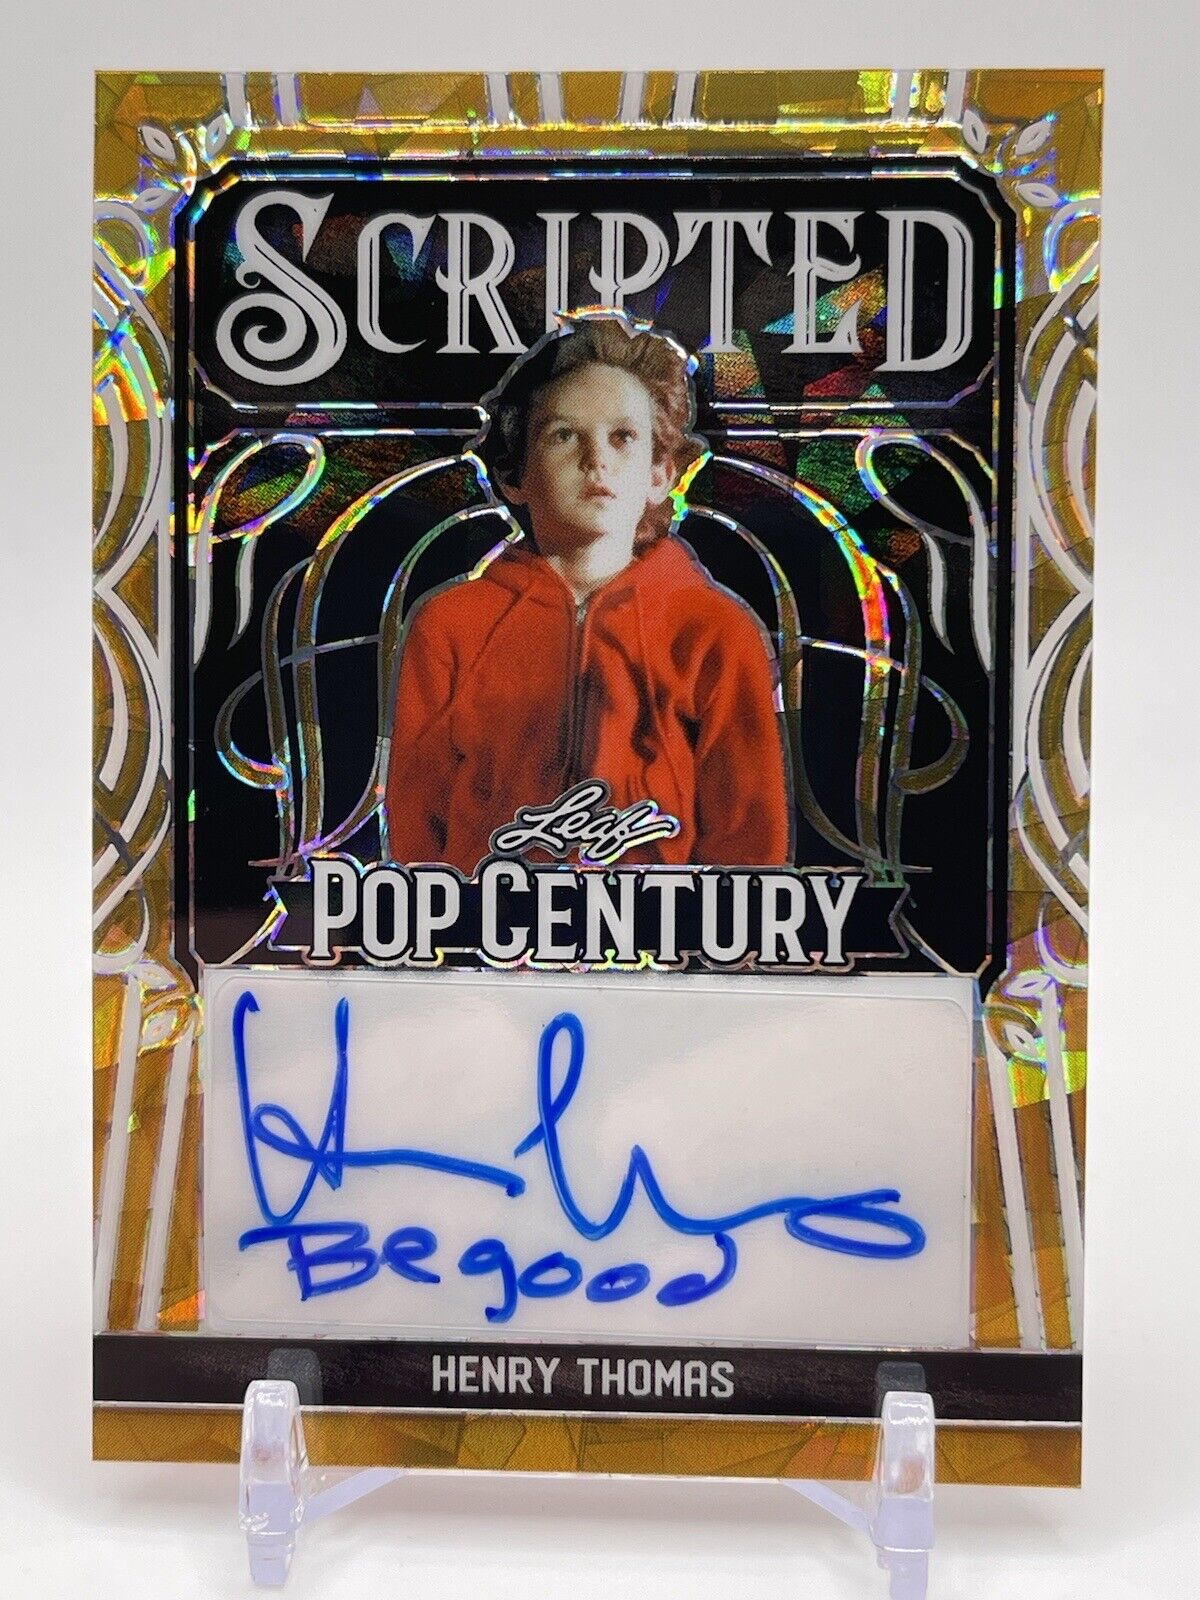 2024 Pop Century Henry Thomas Scripted ‘Be Good’ E.T. Elliot Gold 1/1 One Of One